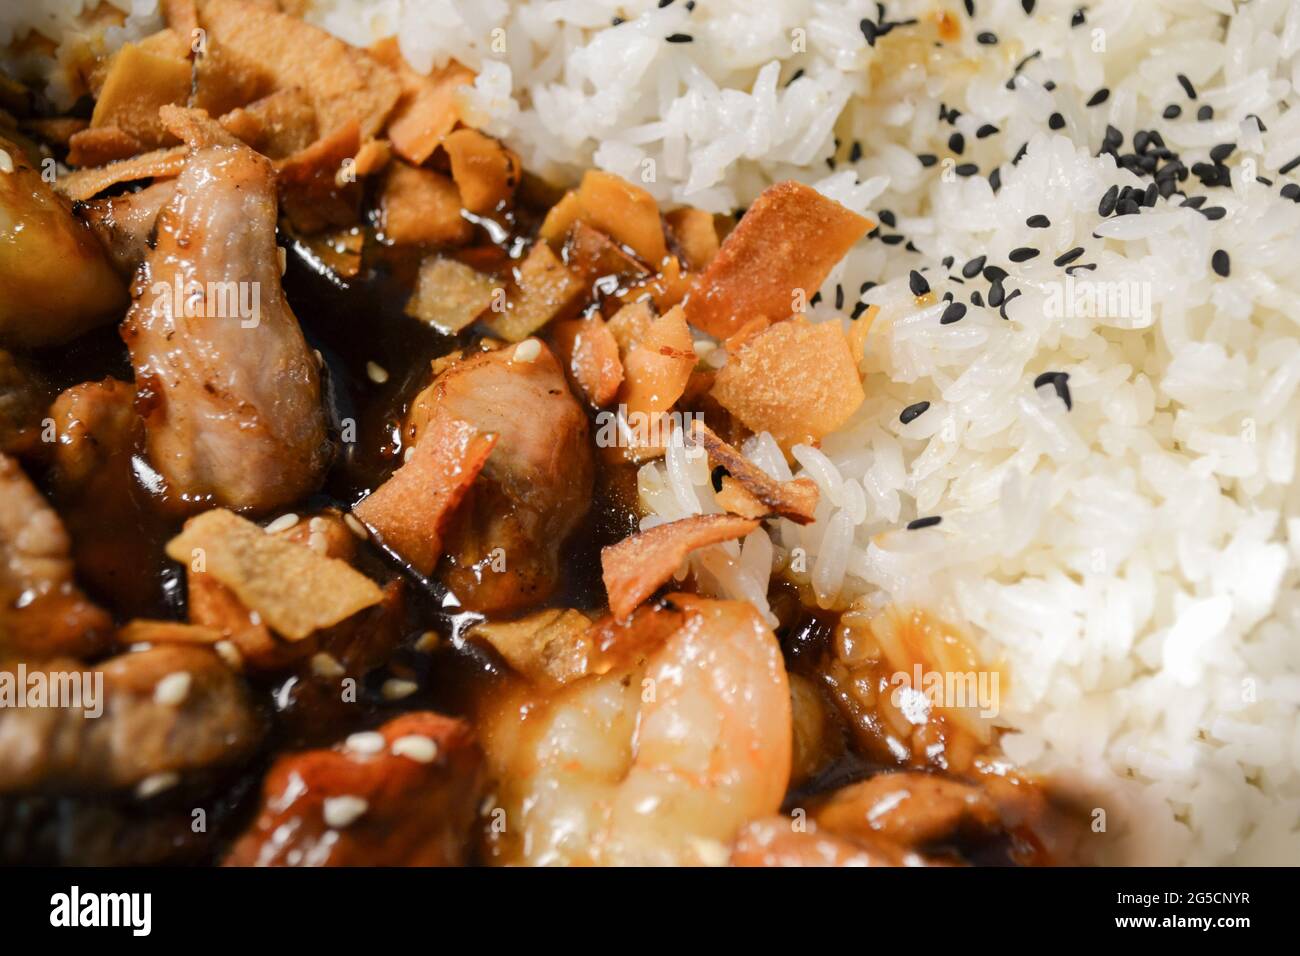 Close-up of Vietnamese food: rice sprinkled with black sesame seeds, beef in gravy, fried carrots. Stock Photo